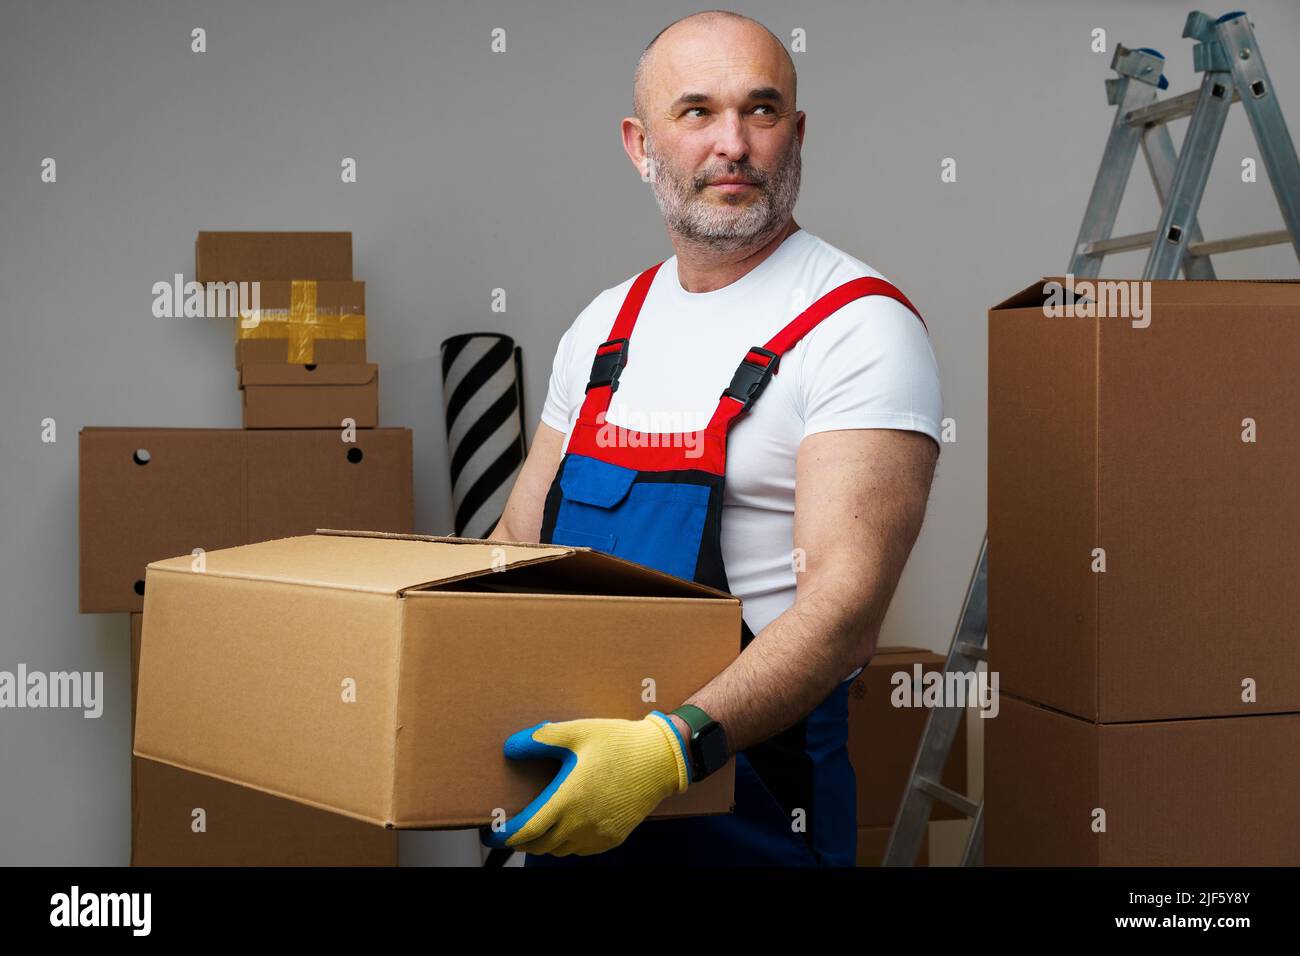 Middle-aged man mover in uniform holding cardboard box, portrait Stock Photo